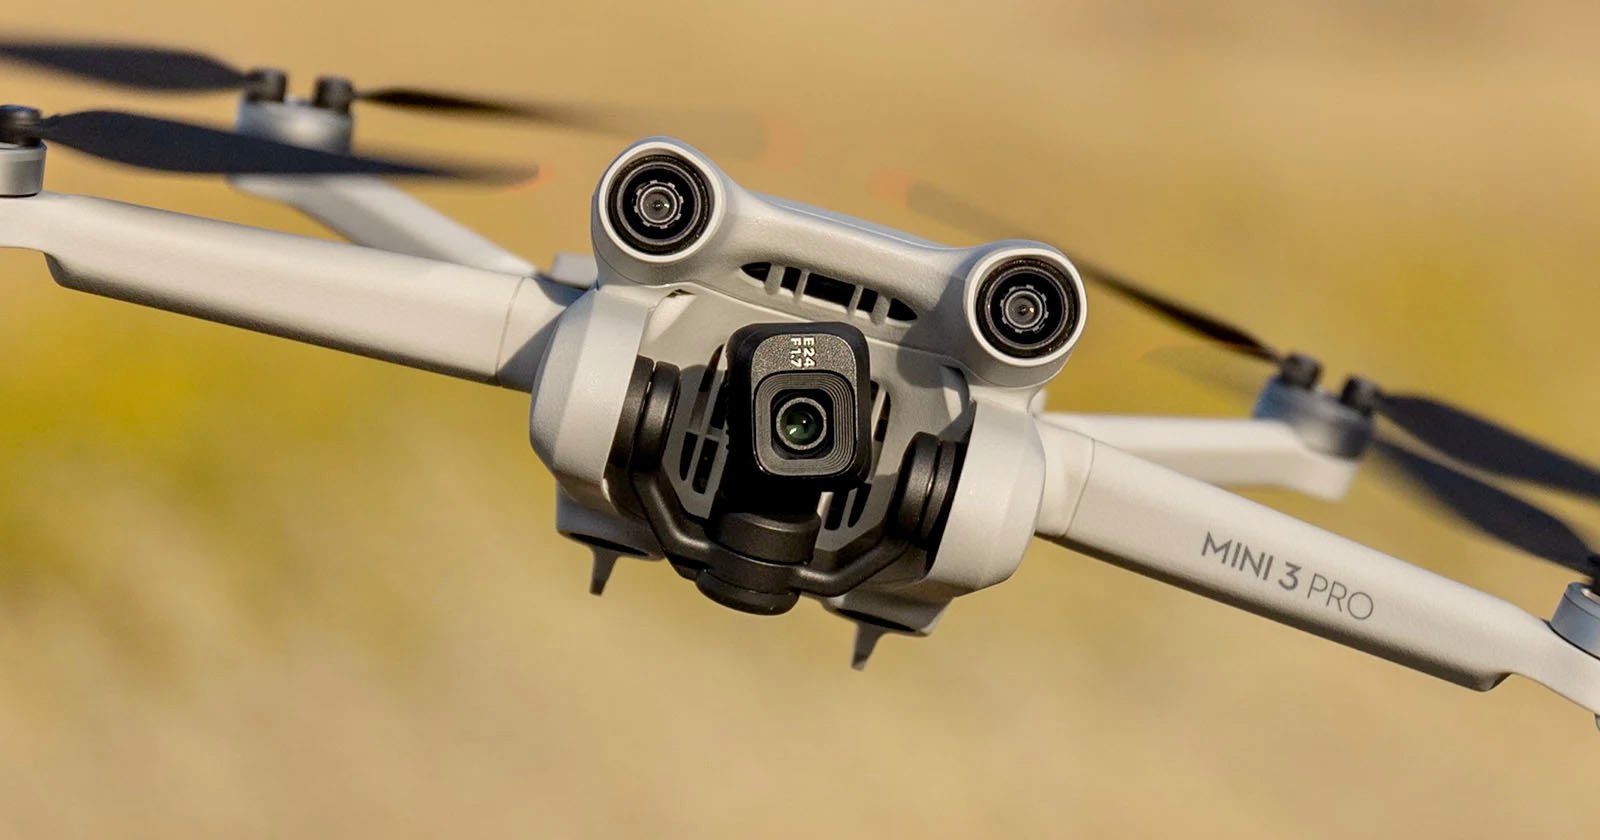 U.S. Dwelling of Representatives Narrowly Passes DJI Drone Ban Month-to-month invoice